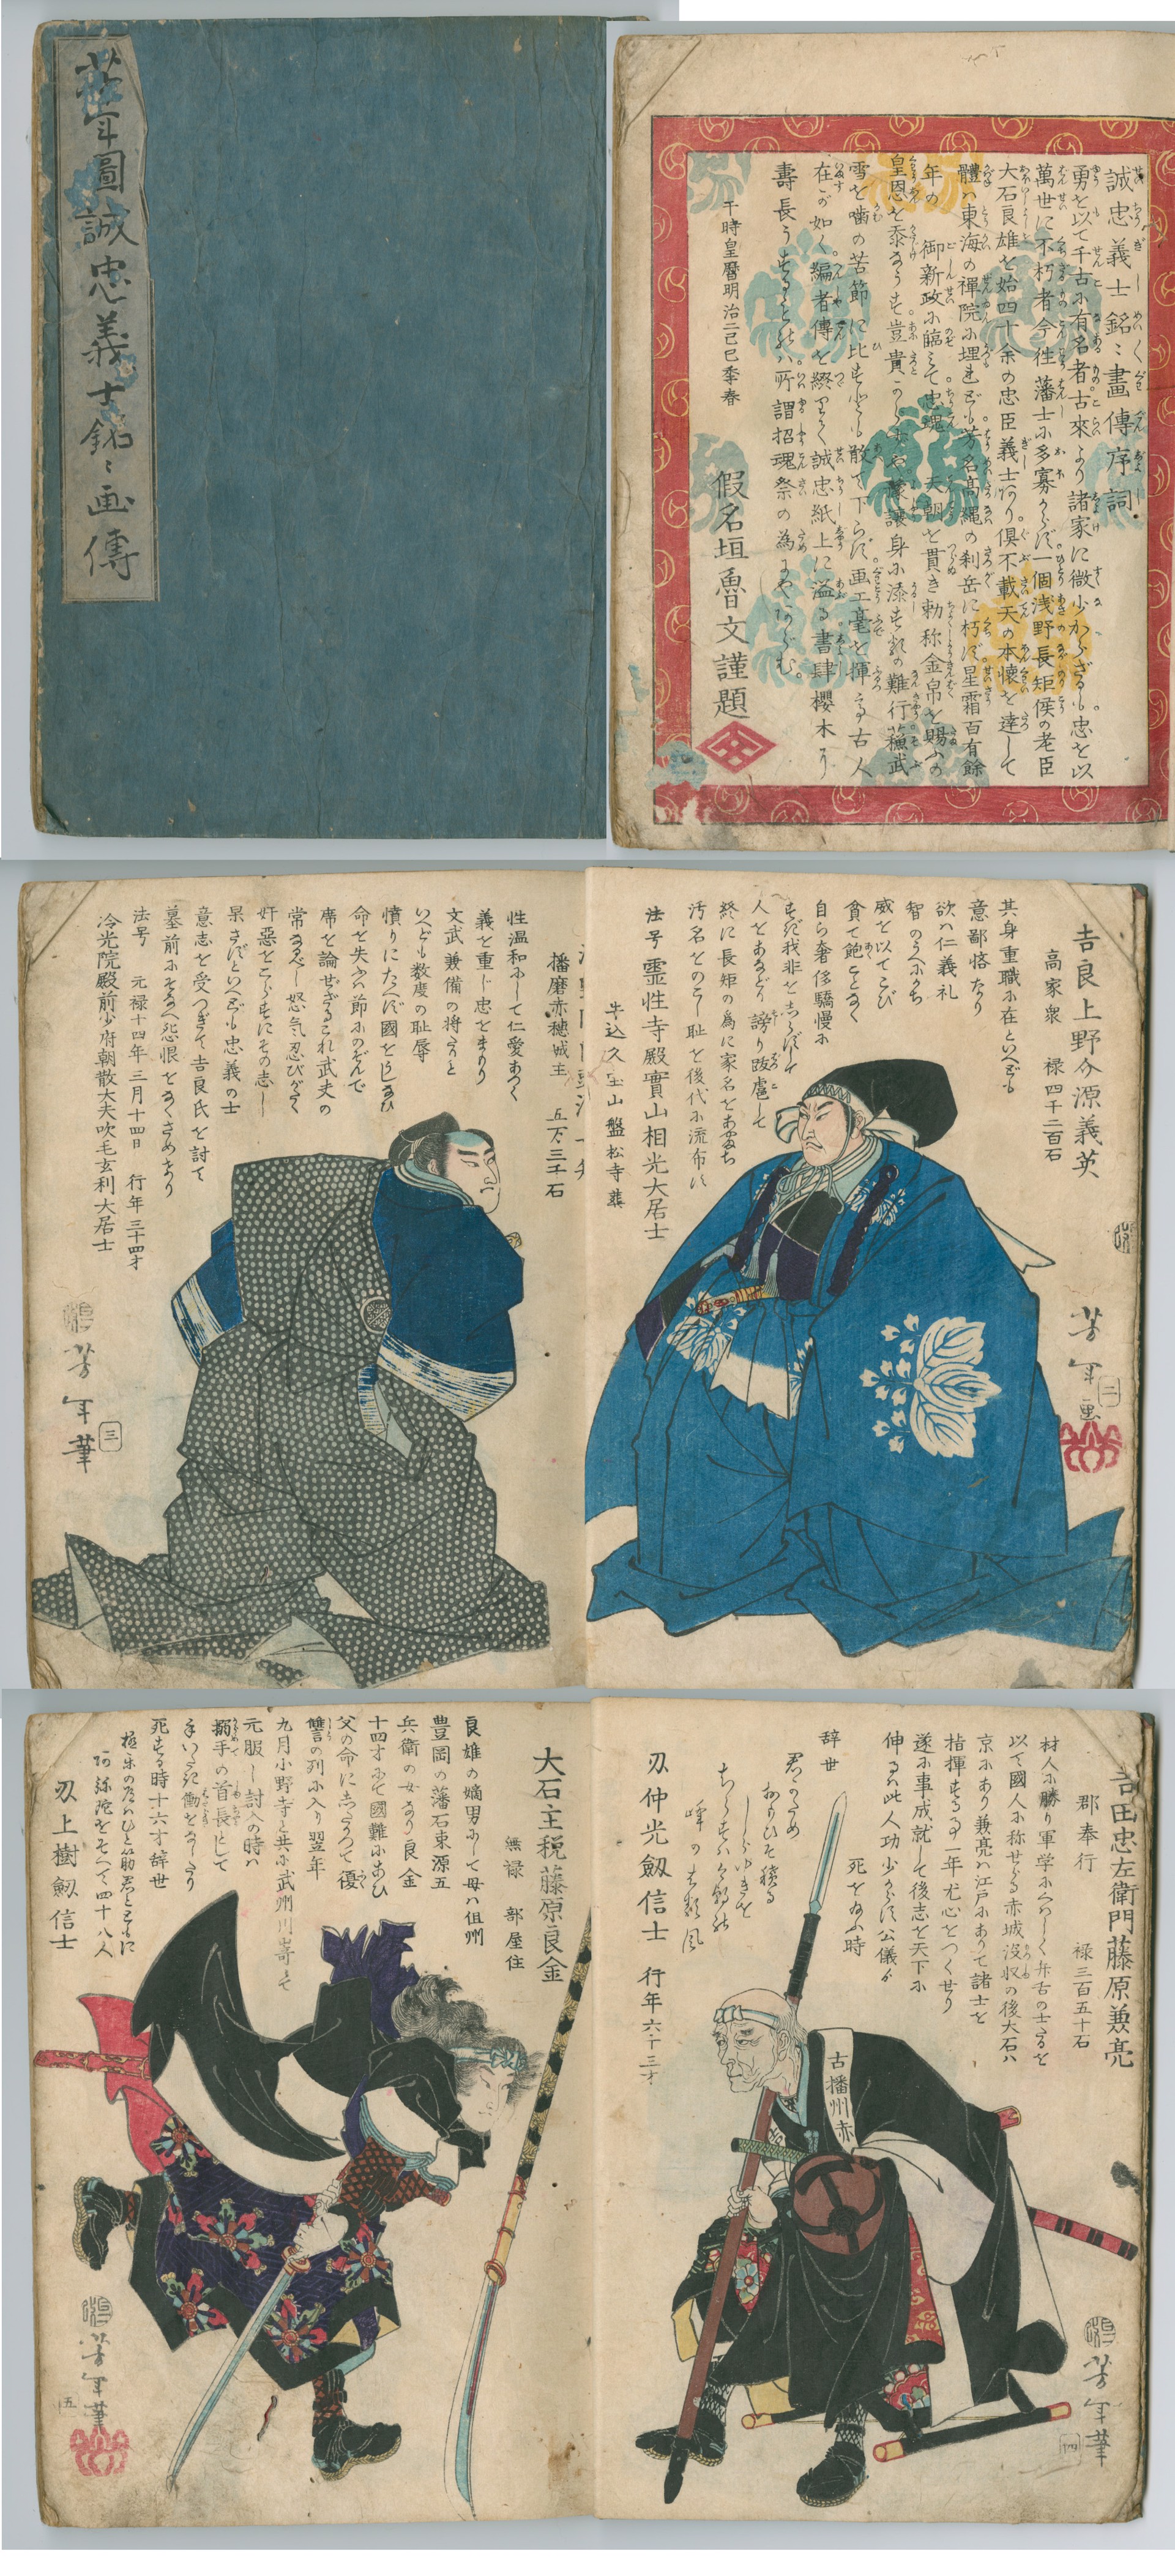 Complete Series of 50, including their enemy Lord Kira and a preface by Kanagaki Robun Pictorial Biographies of the Loyal Retainers by Yoshitoshi